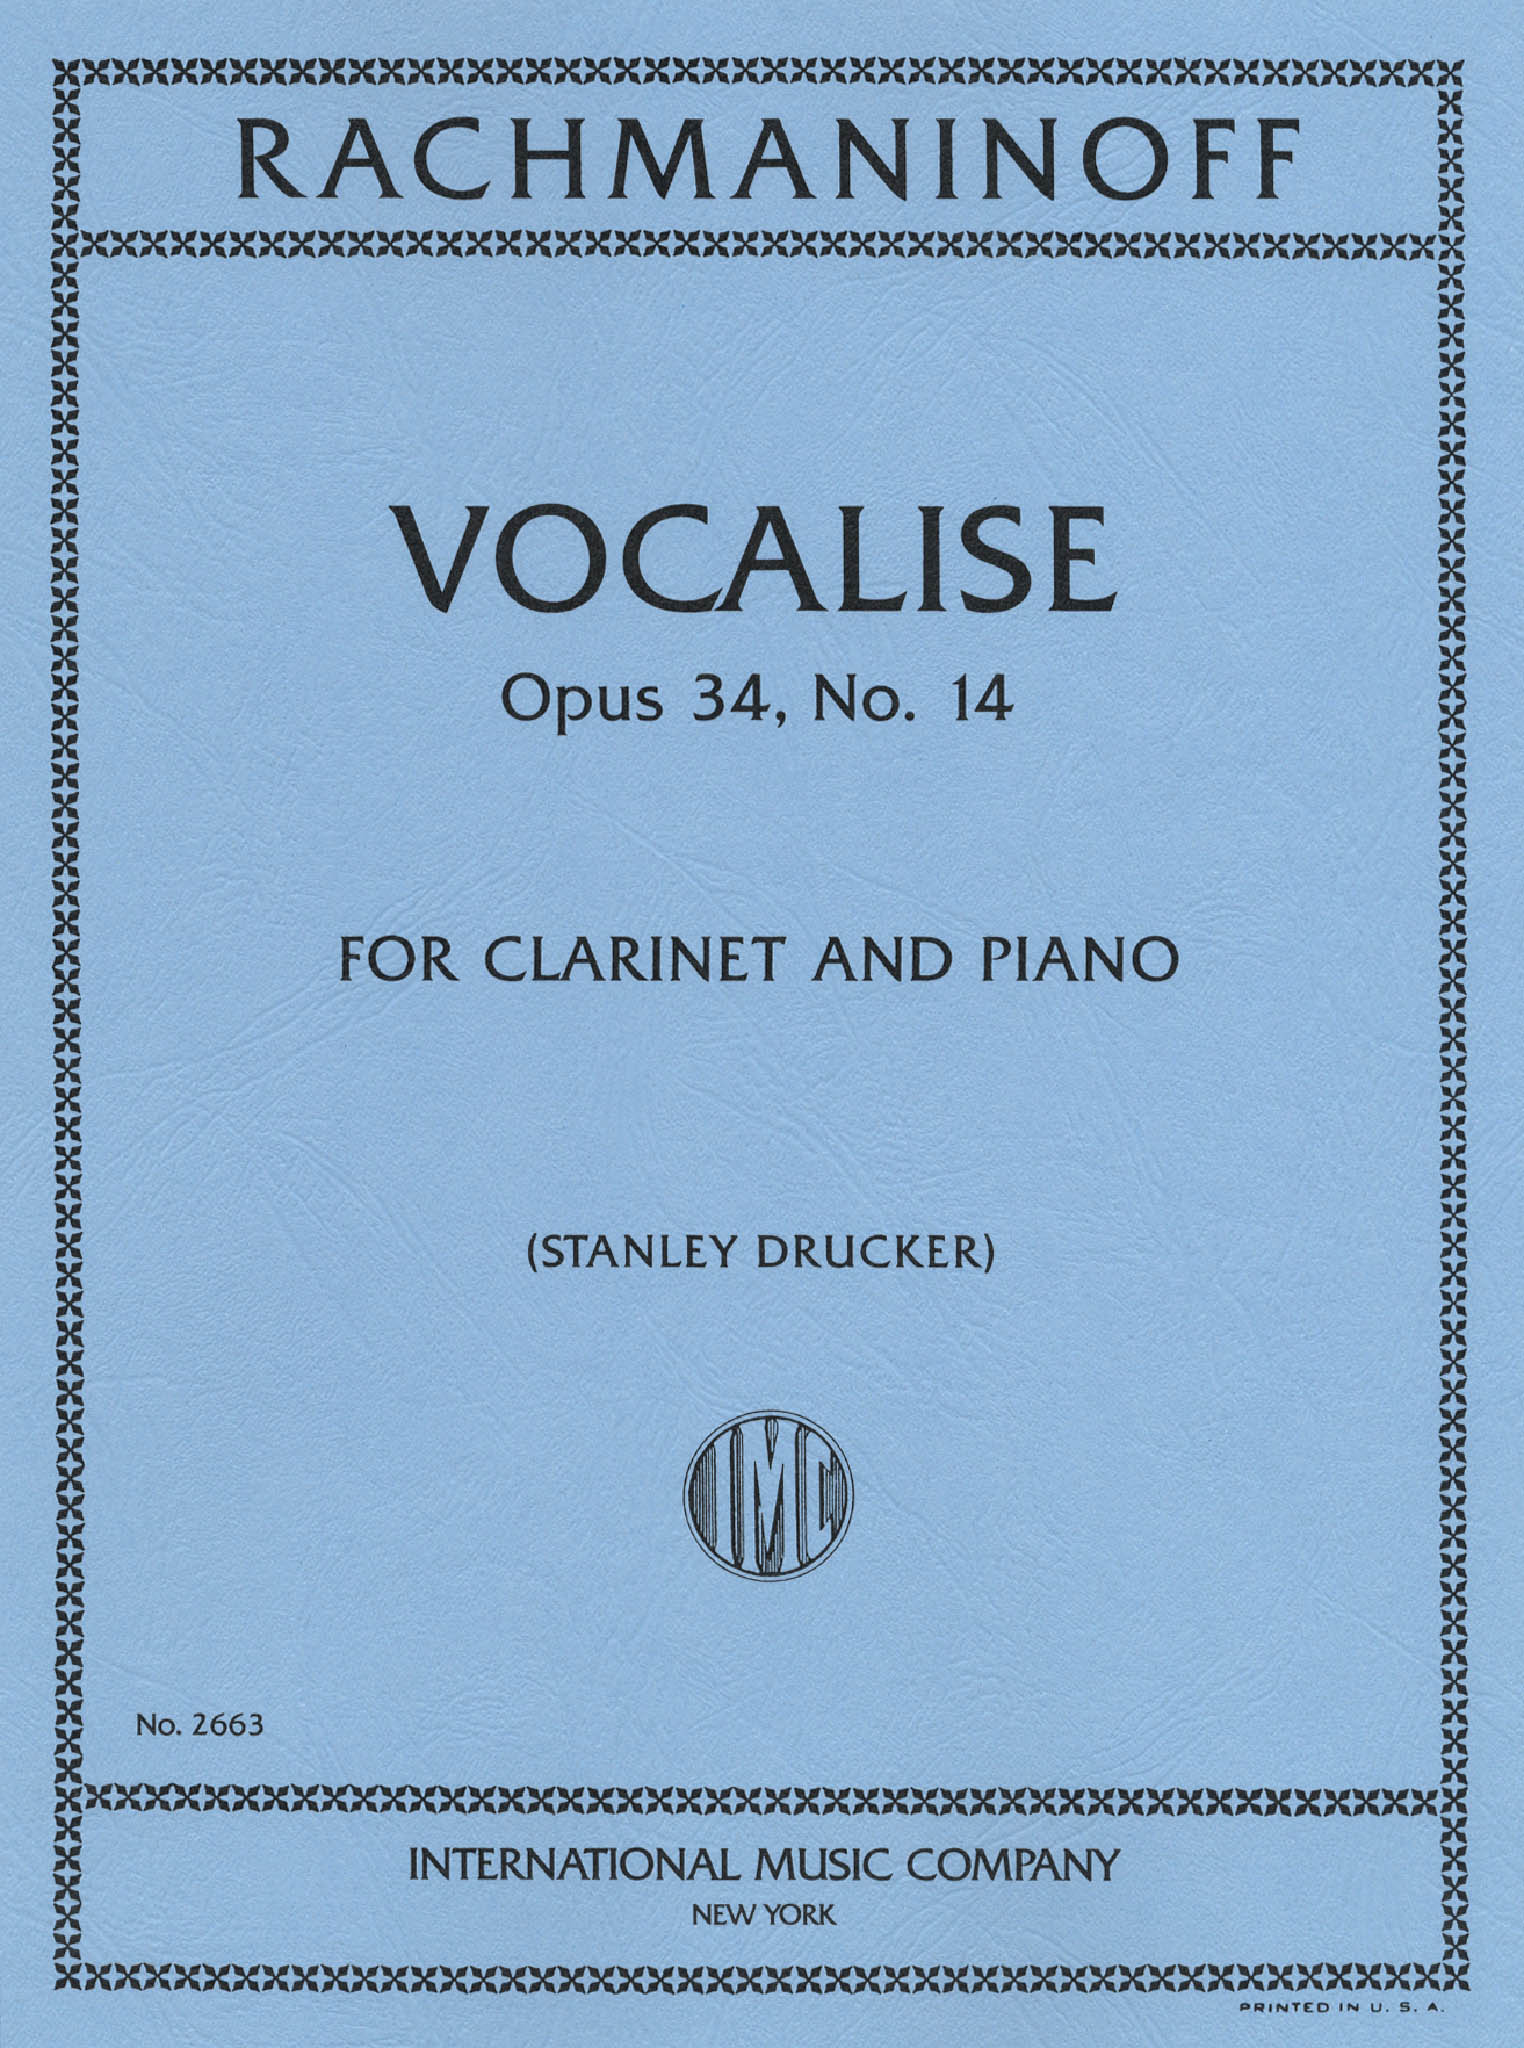 Rachmaninoff Vocalise, Op. 34 No. 14 for clarinet & piano Cover